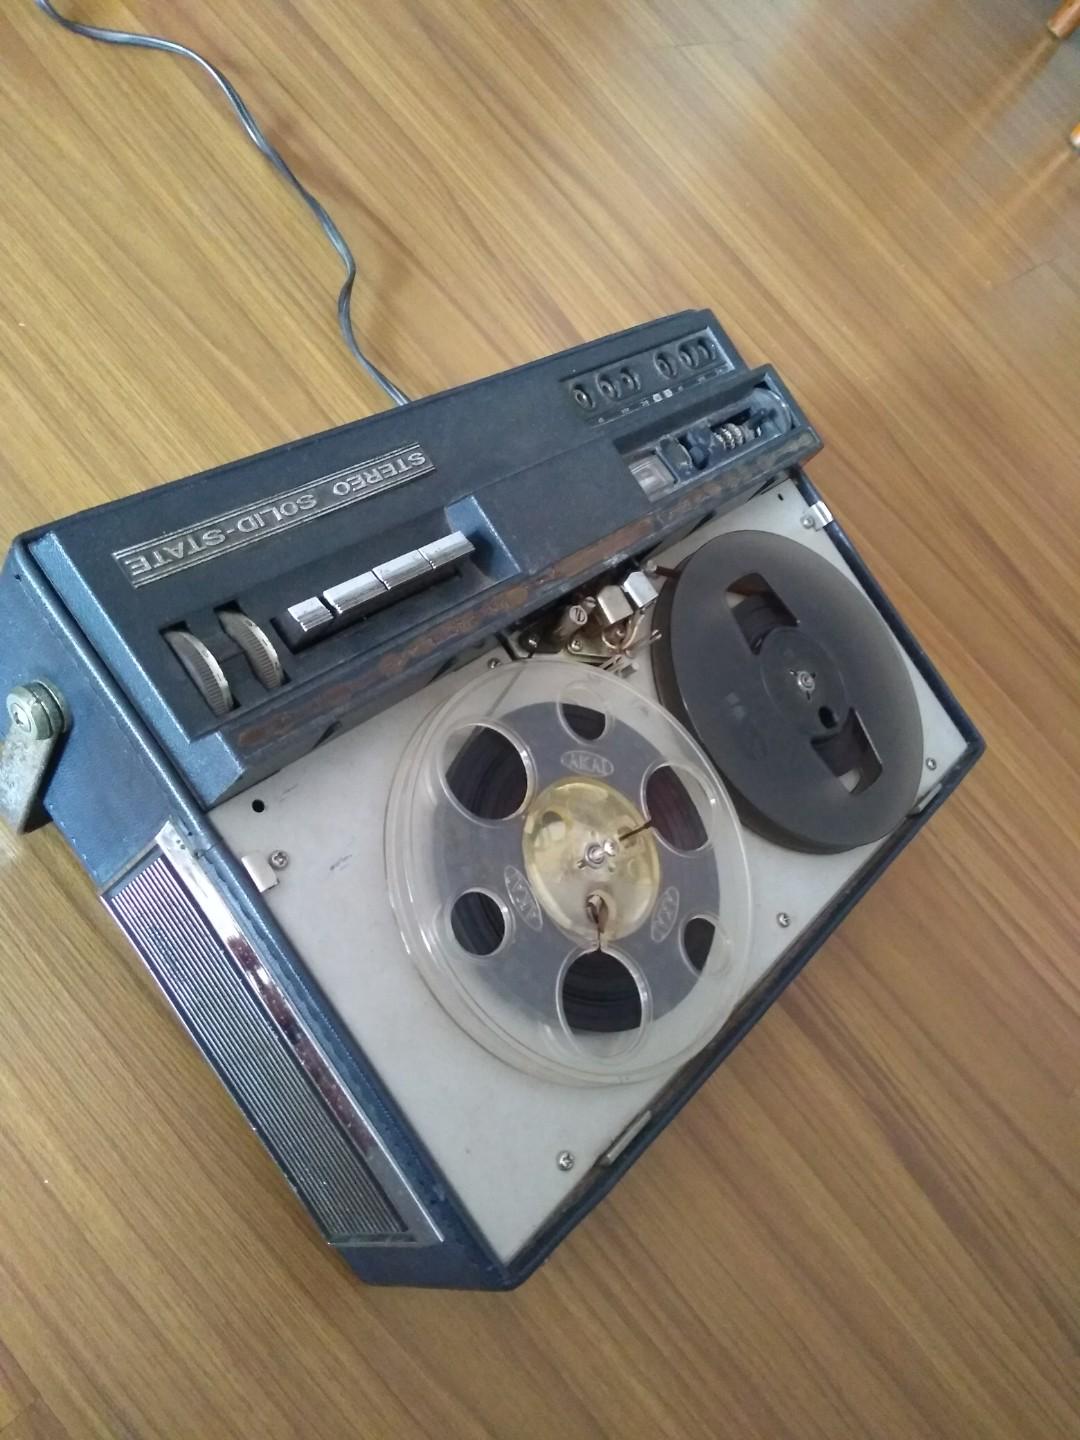 Reel to reel recorder, Hobbies & Toys, Collectibles & Memorabilia, Vintage  Collectibles on Carousell